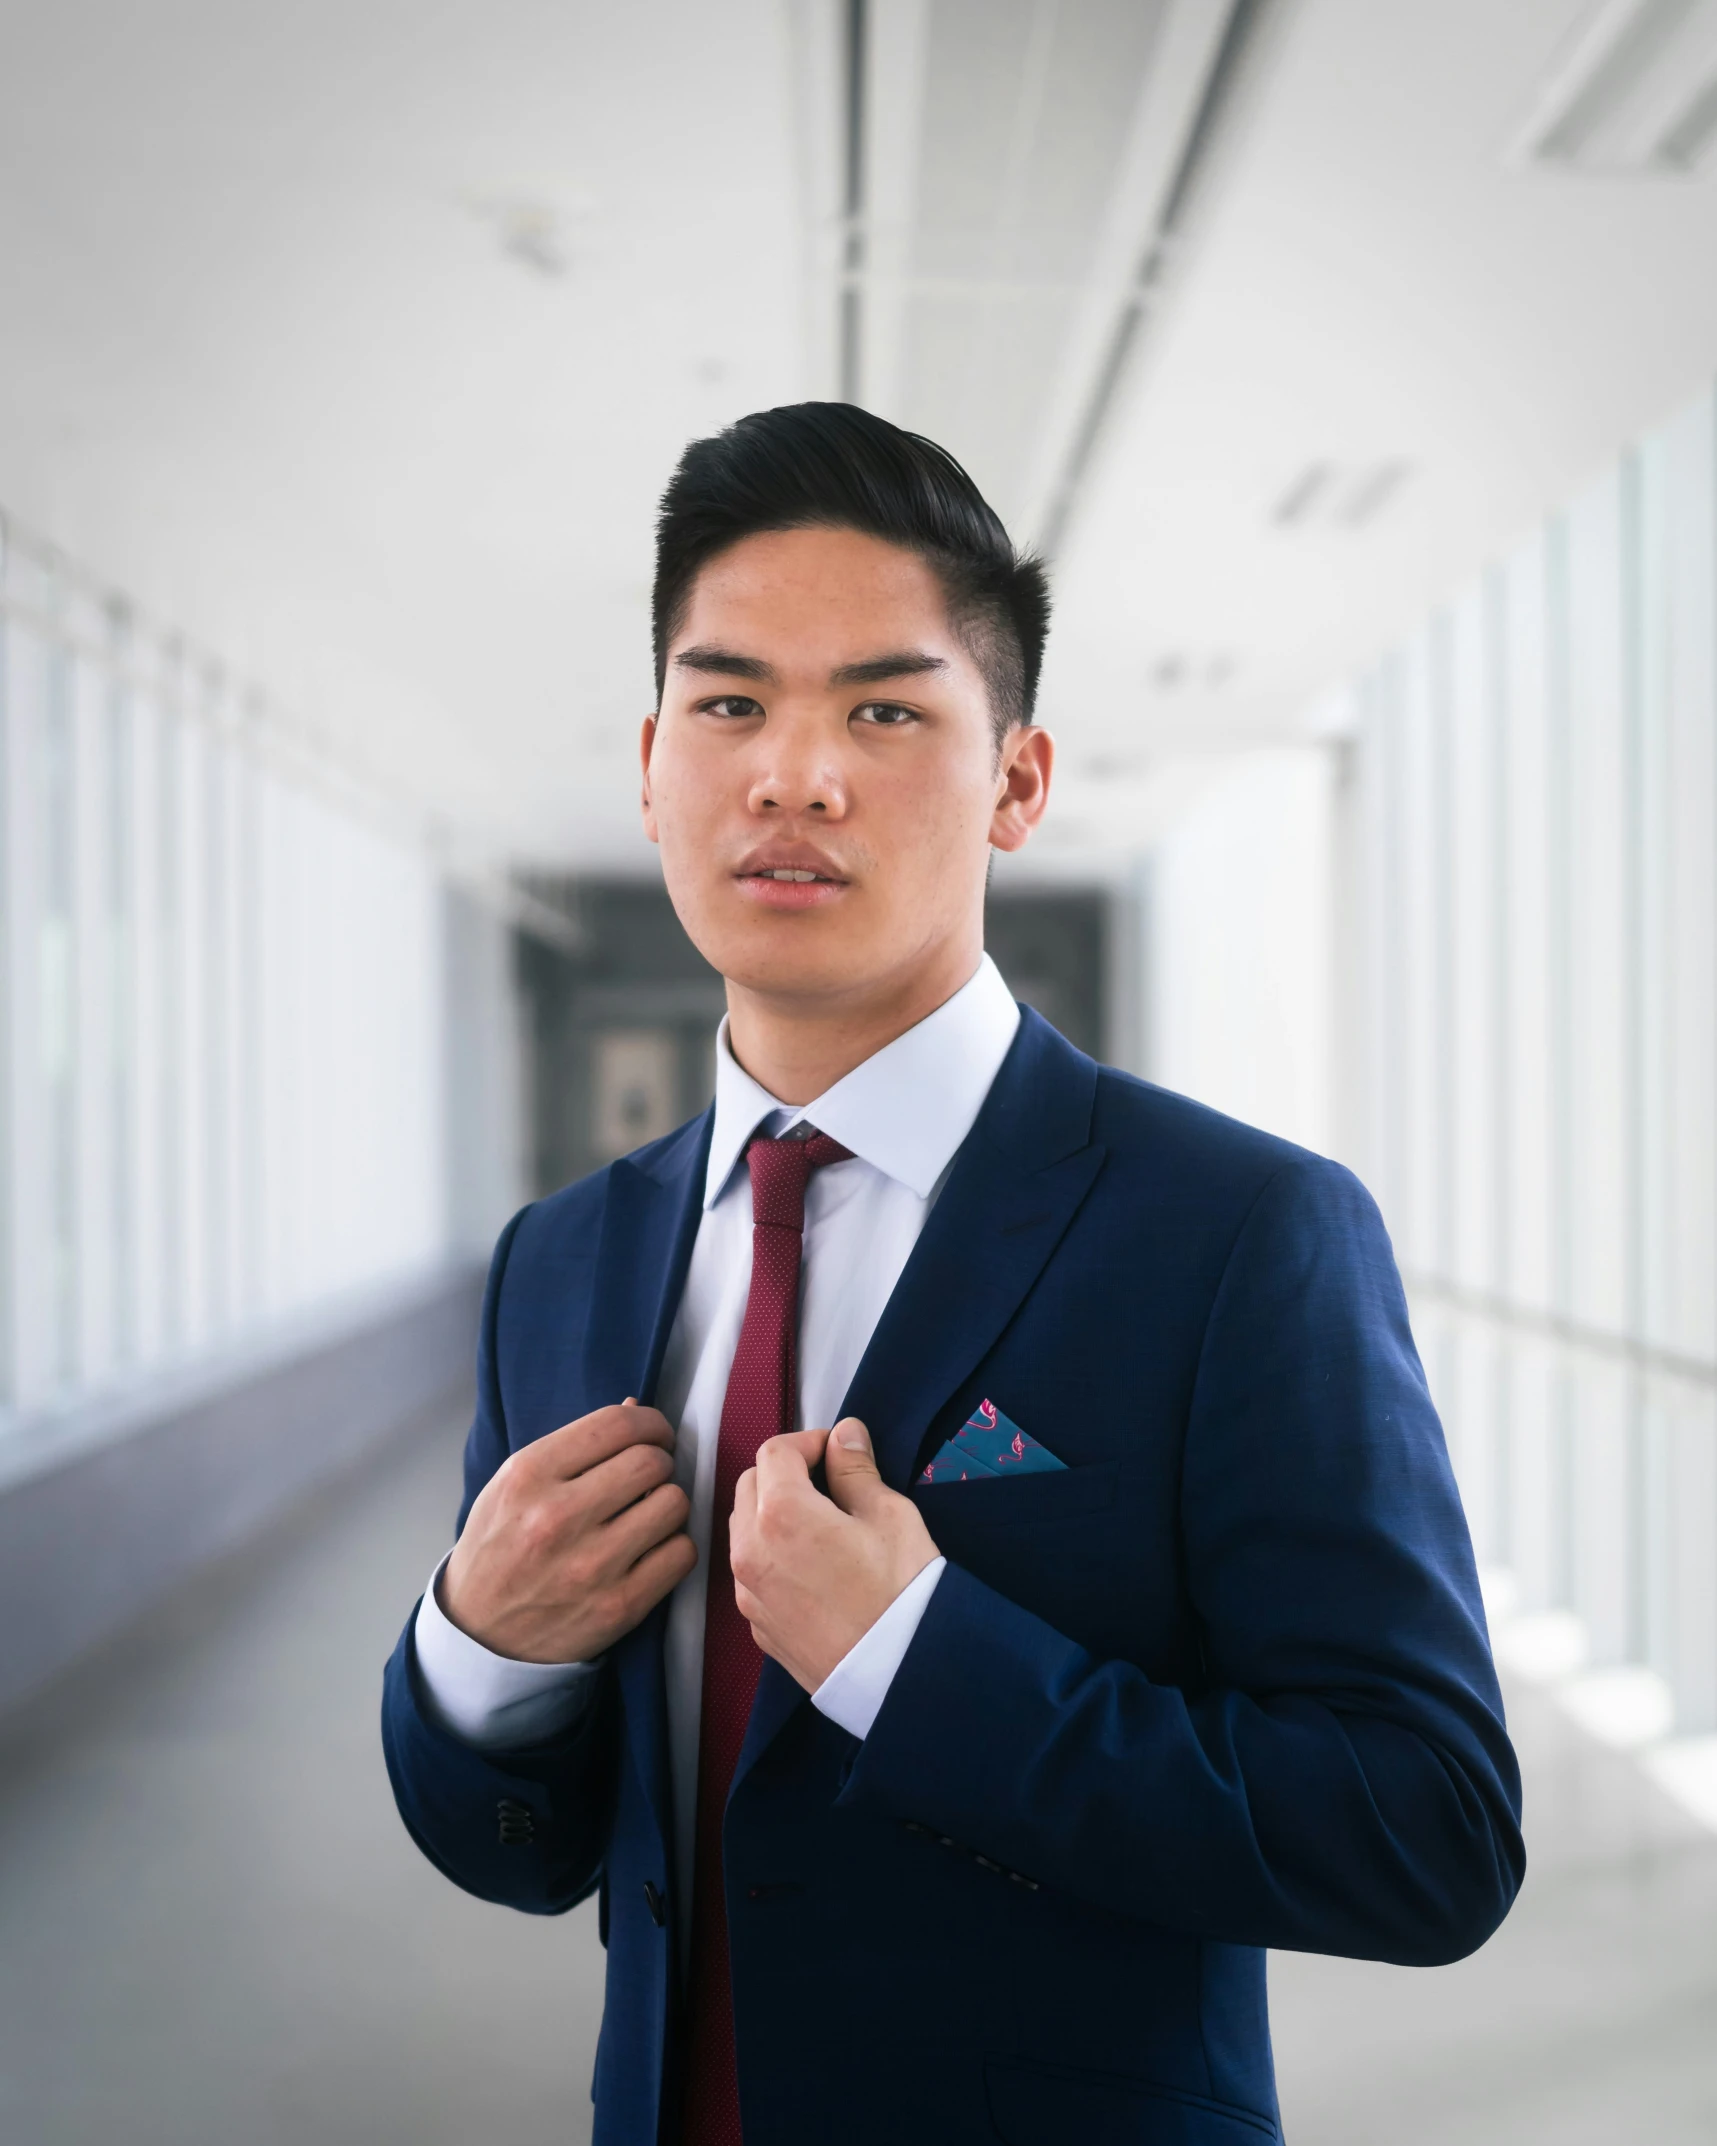 an asian man in a suit standing in a room